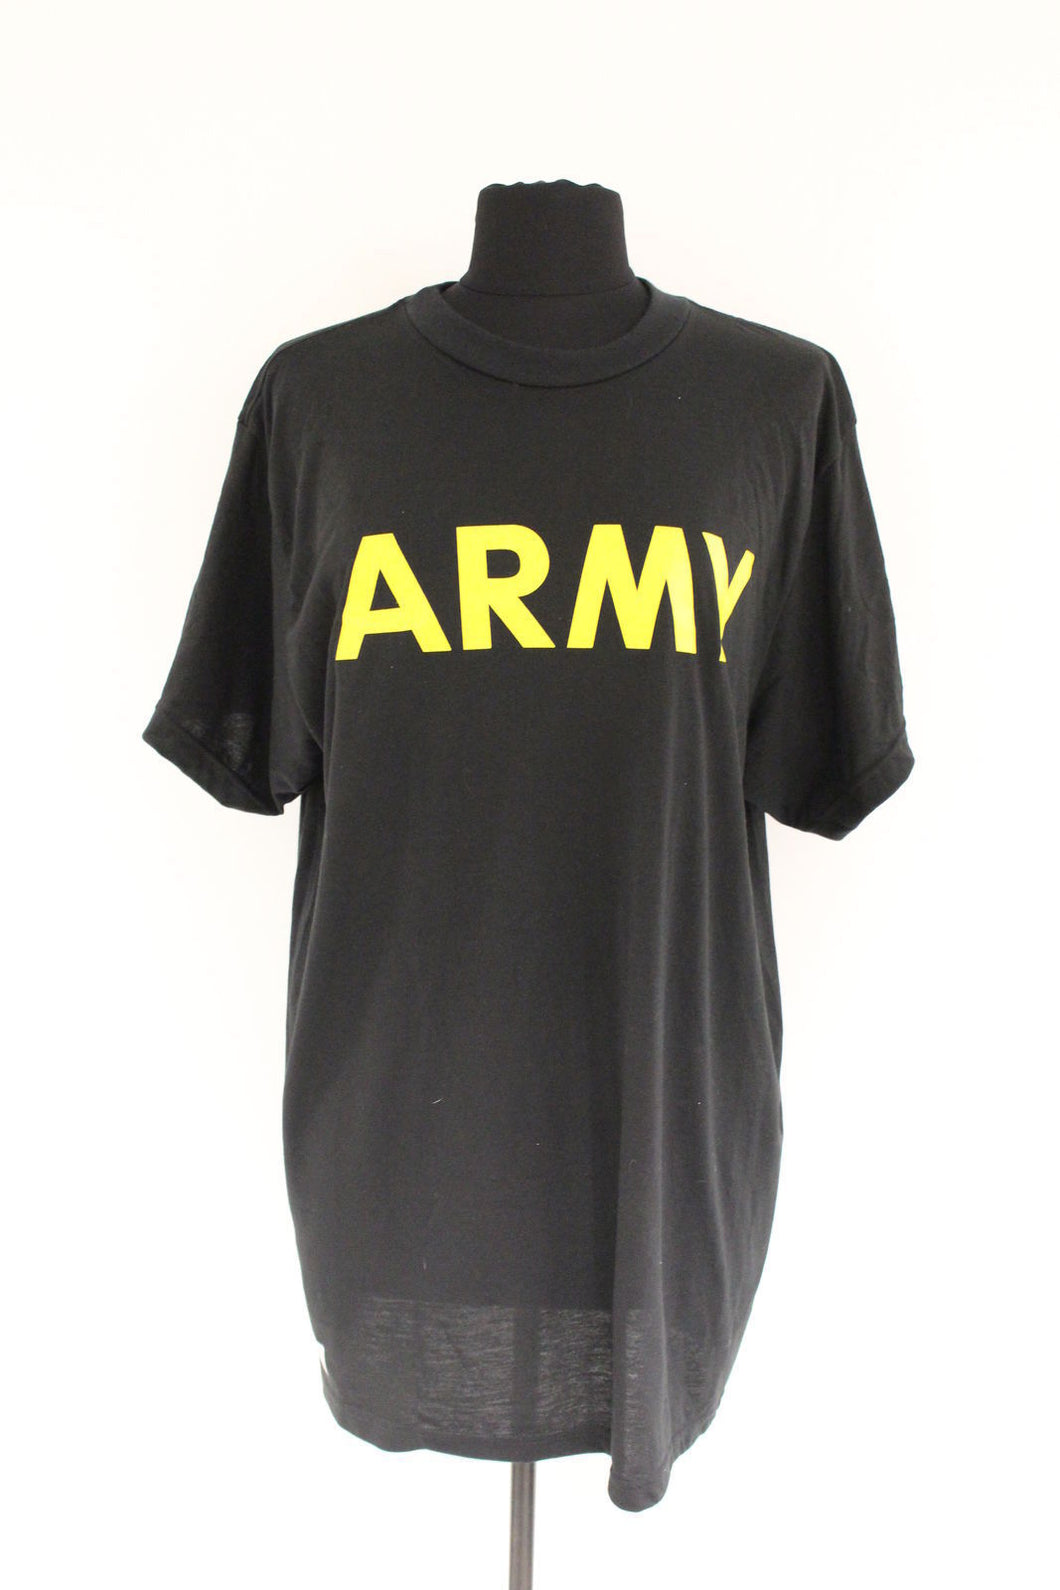 US Army Short Sleeve PT Physical Fitness APFU T-Shirt - Choose Size - Used